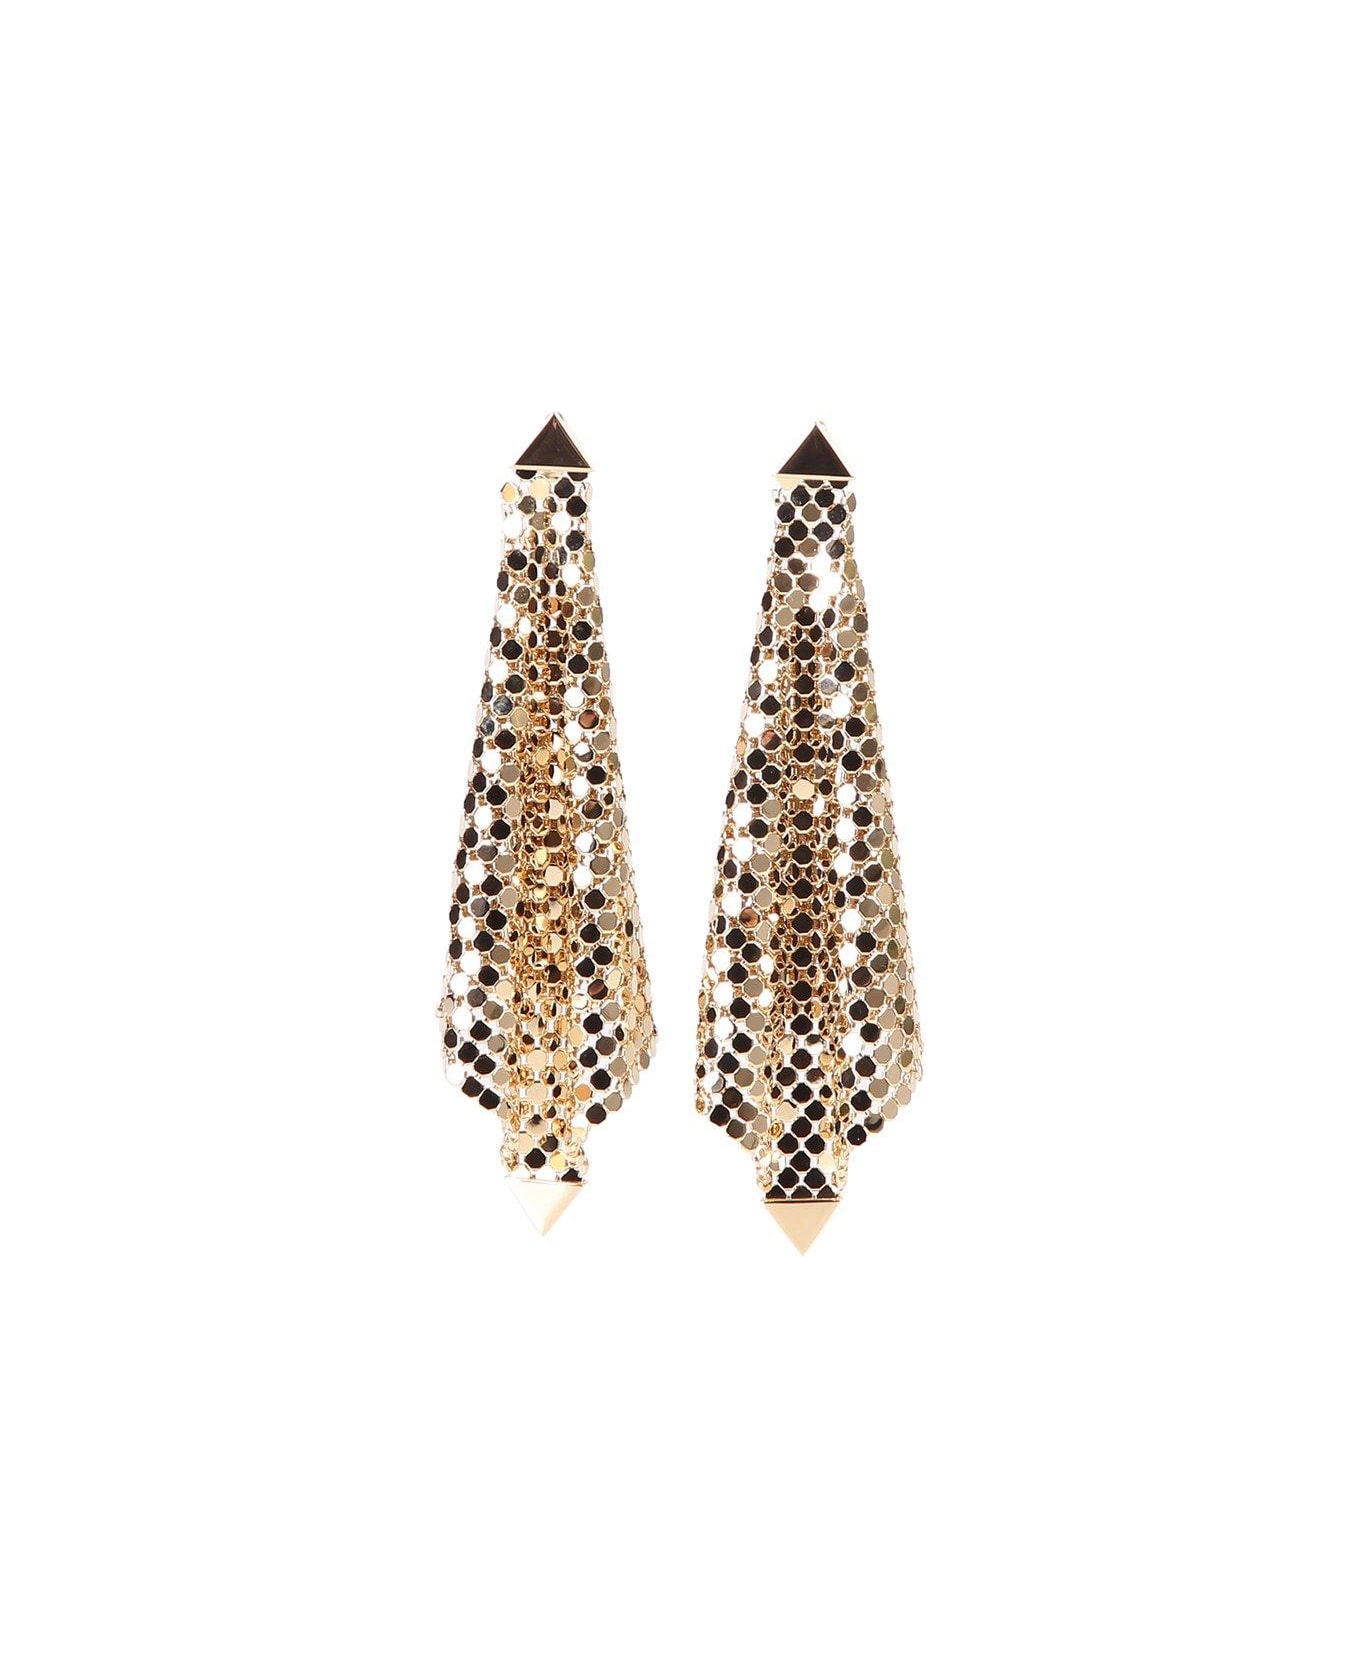 Paco Rabanne Chained Mesh Earrings - GOLD イヤリング